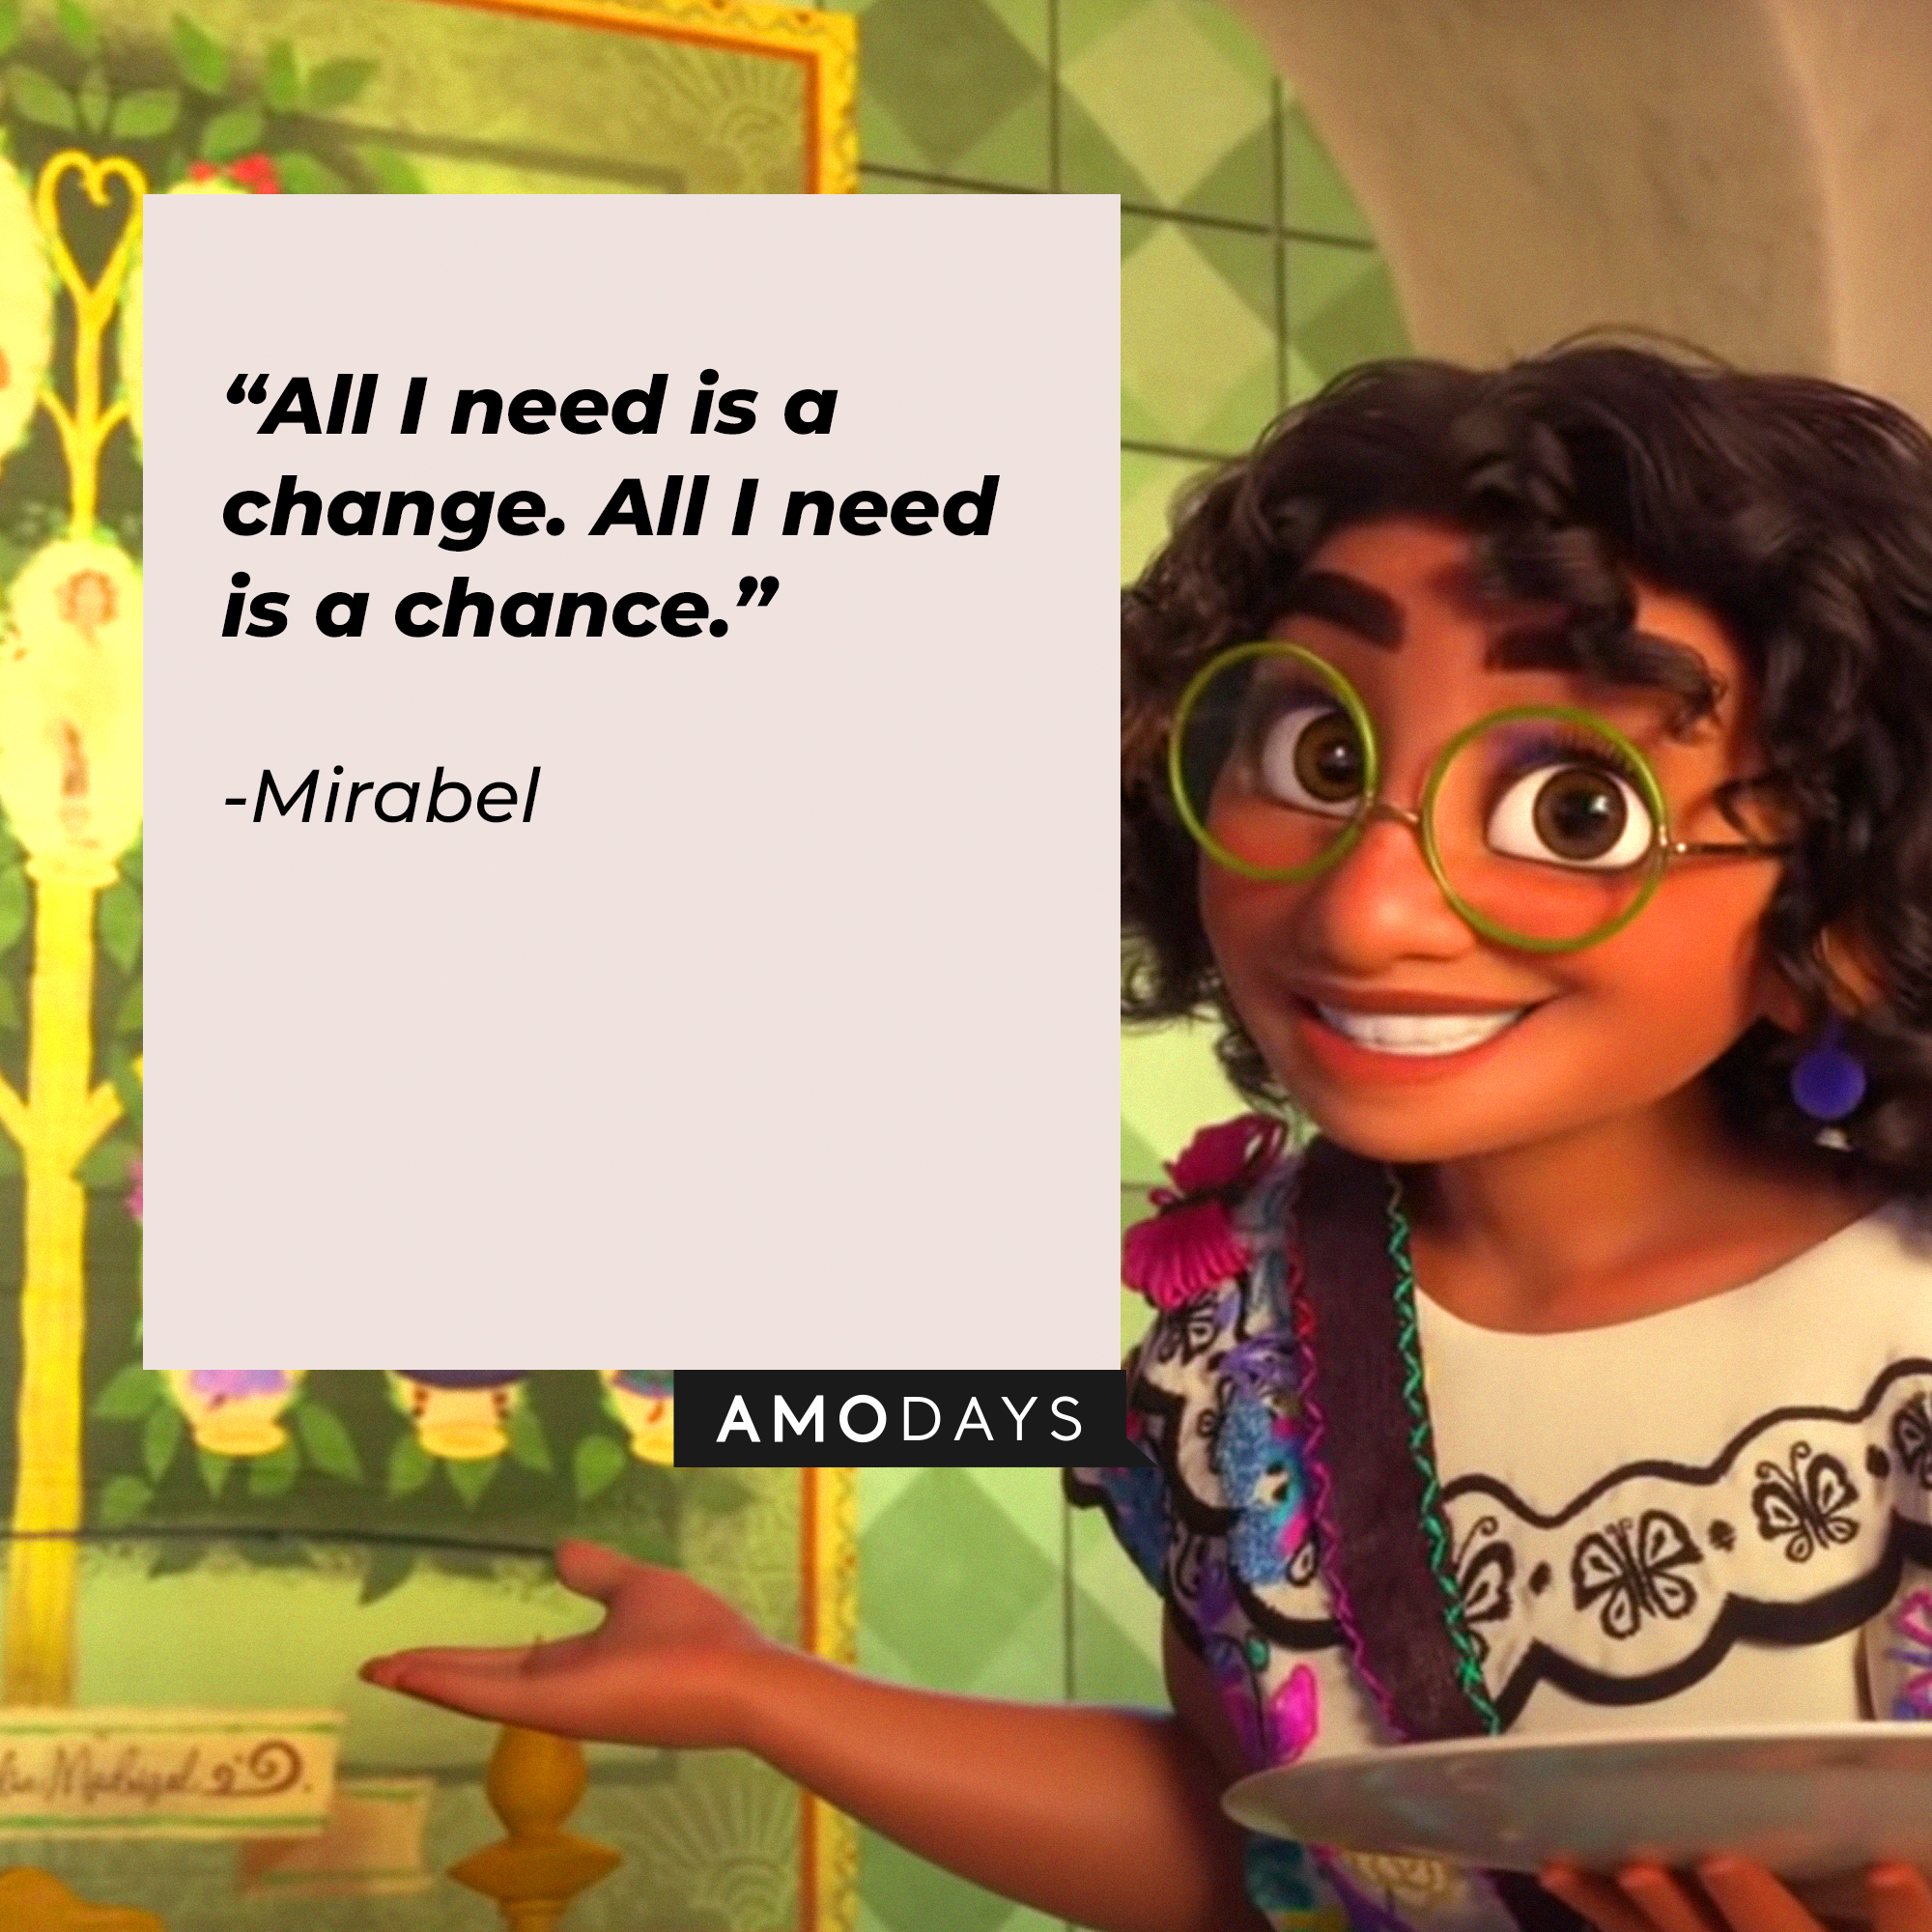 An image of Mirabel, with her quote: "All I need is a change. All I need is a chance." | Source: Youtube.com/DisneyMusicVEVO